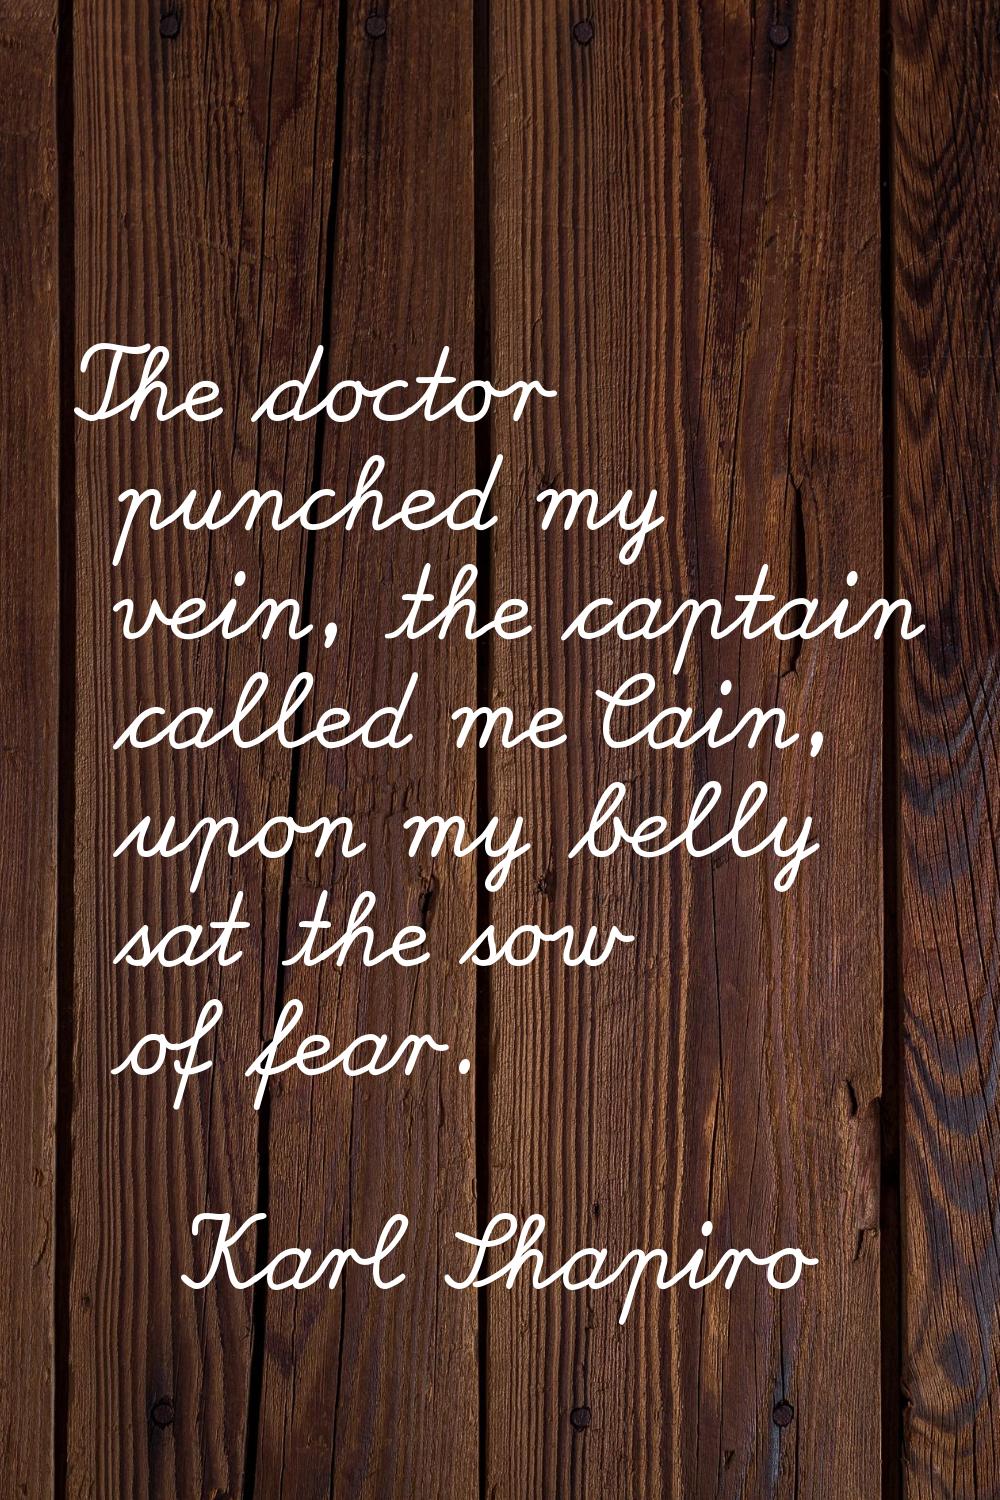 The doctor punched my vein, the captain called me Cain, upon my belly sat the sow of fear.